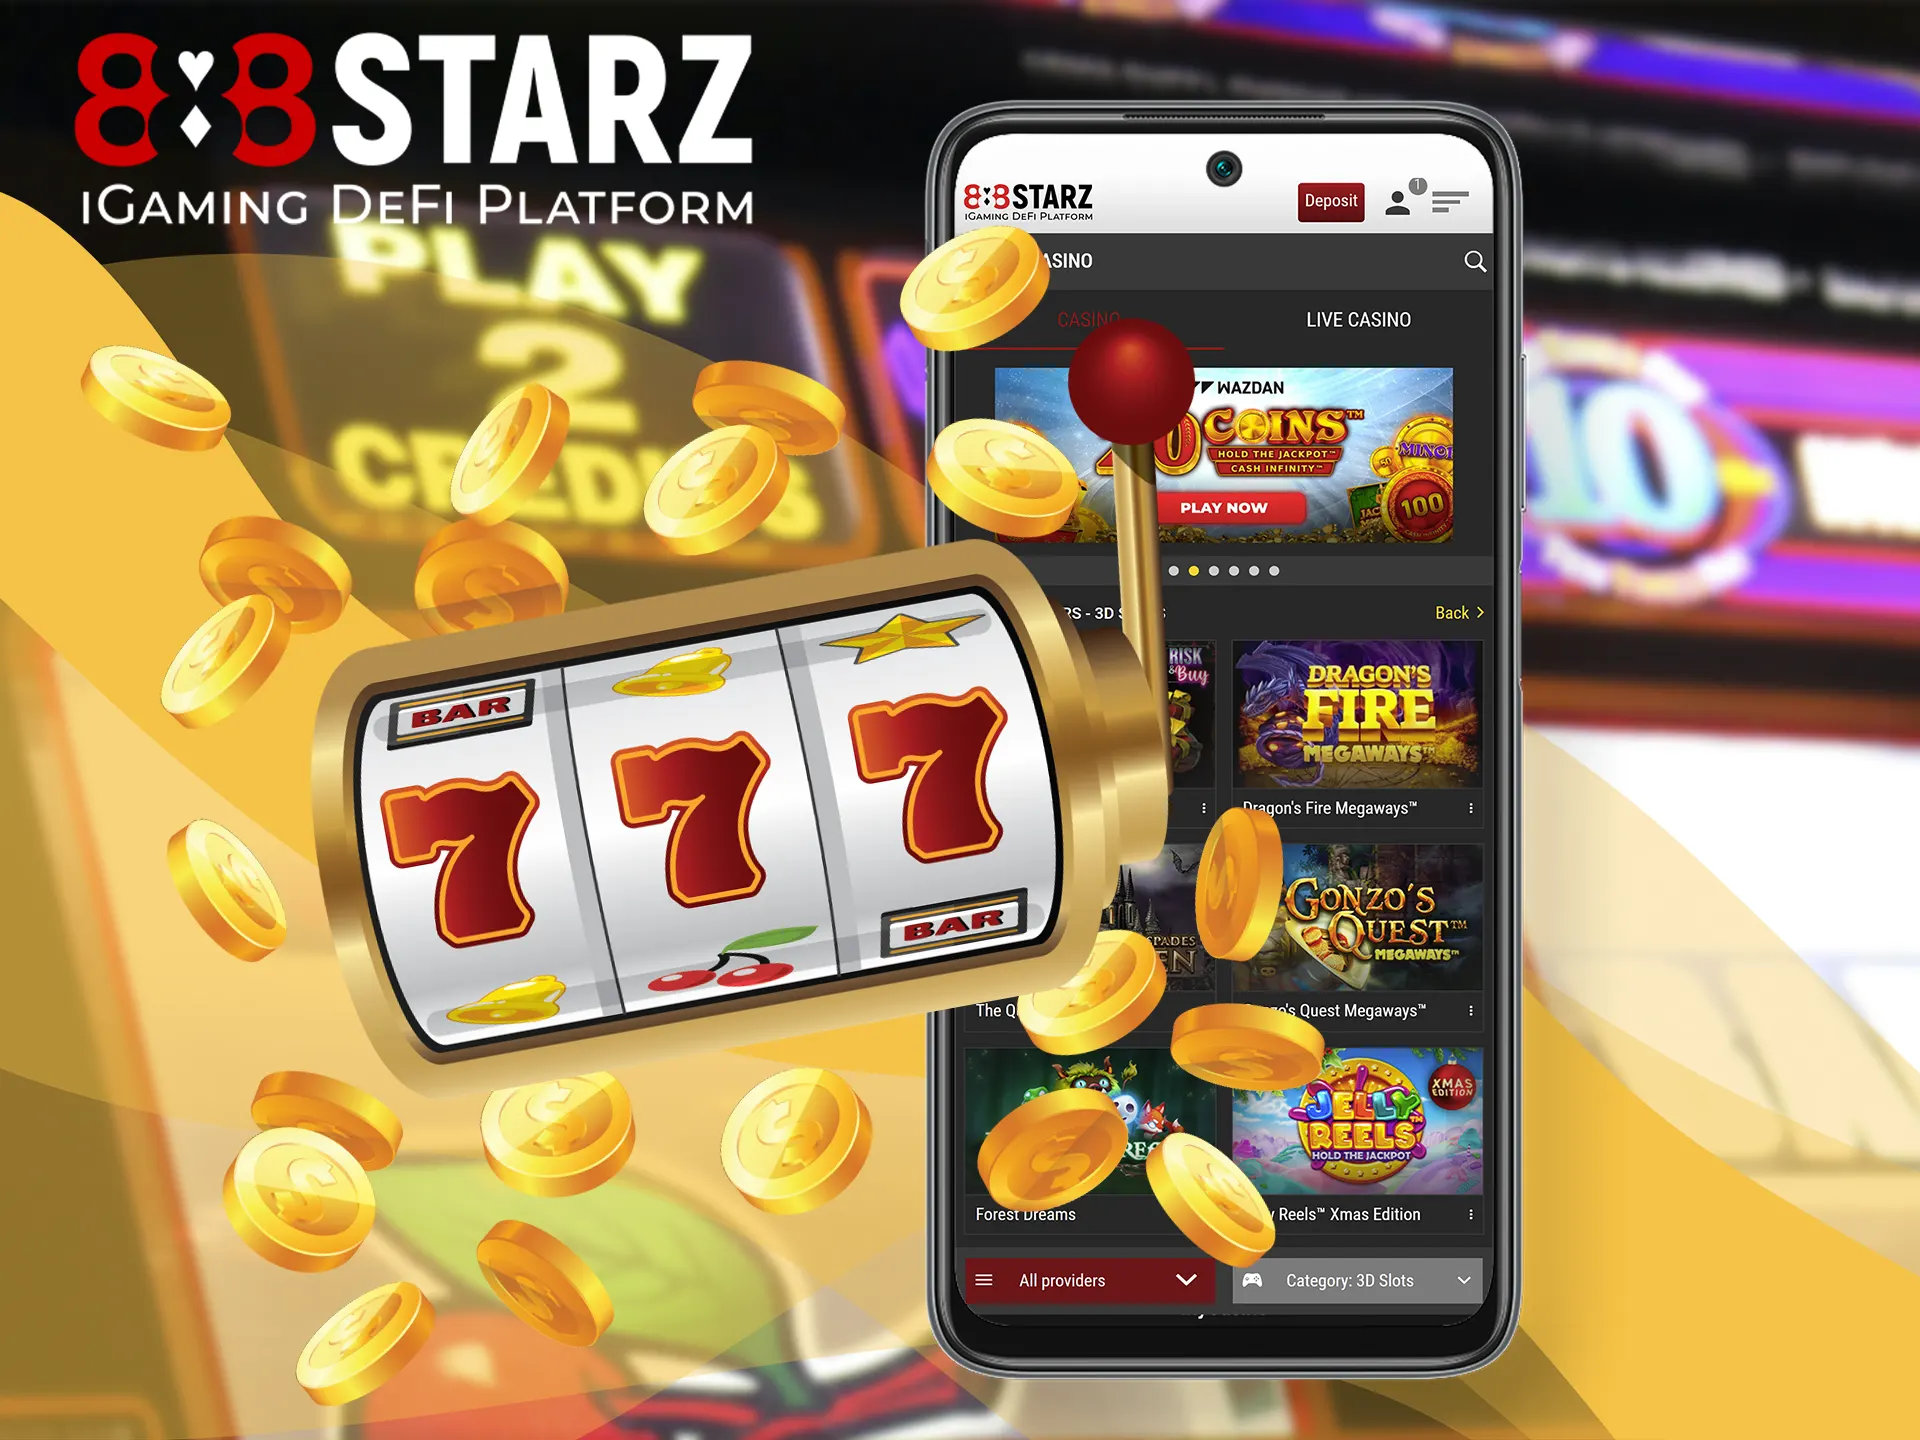 Users from Bangladesh have a unique opportunity to play slot machines directly from their device on the 888starz.